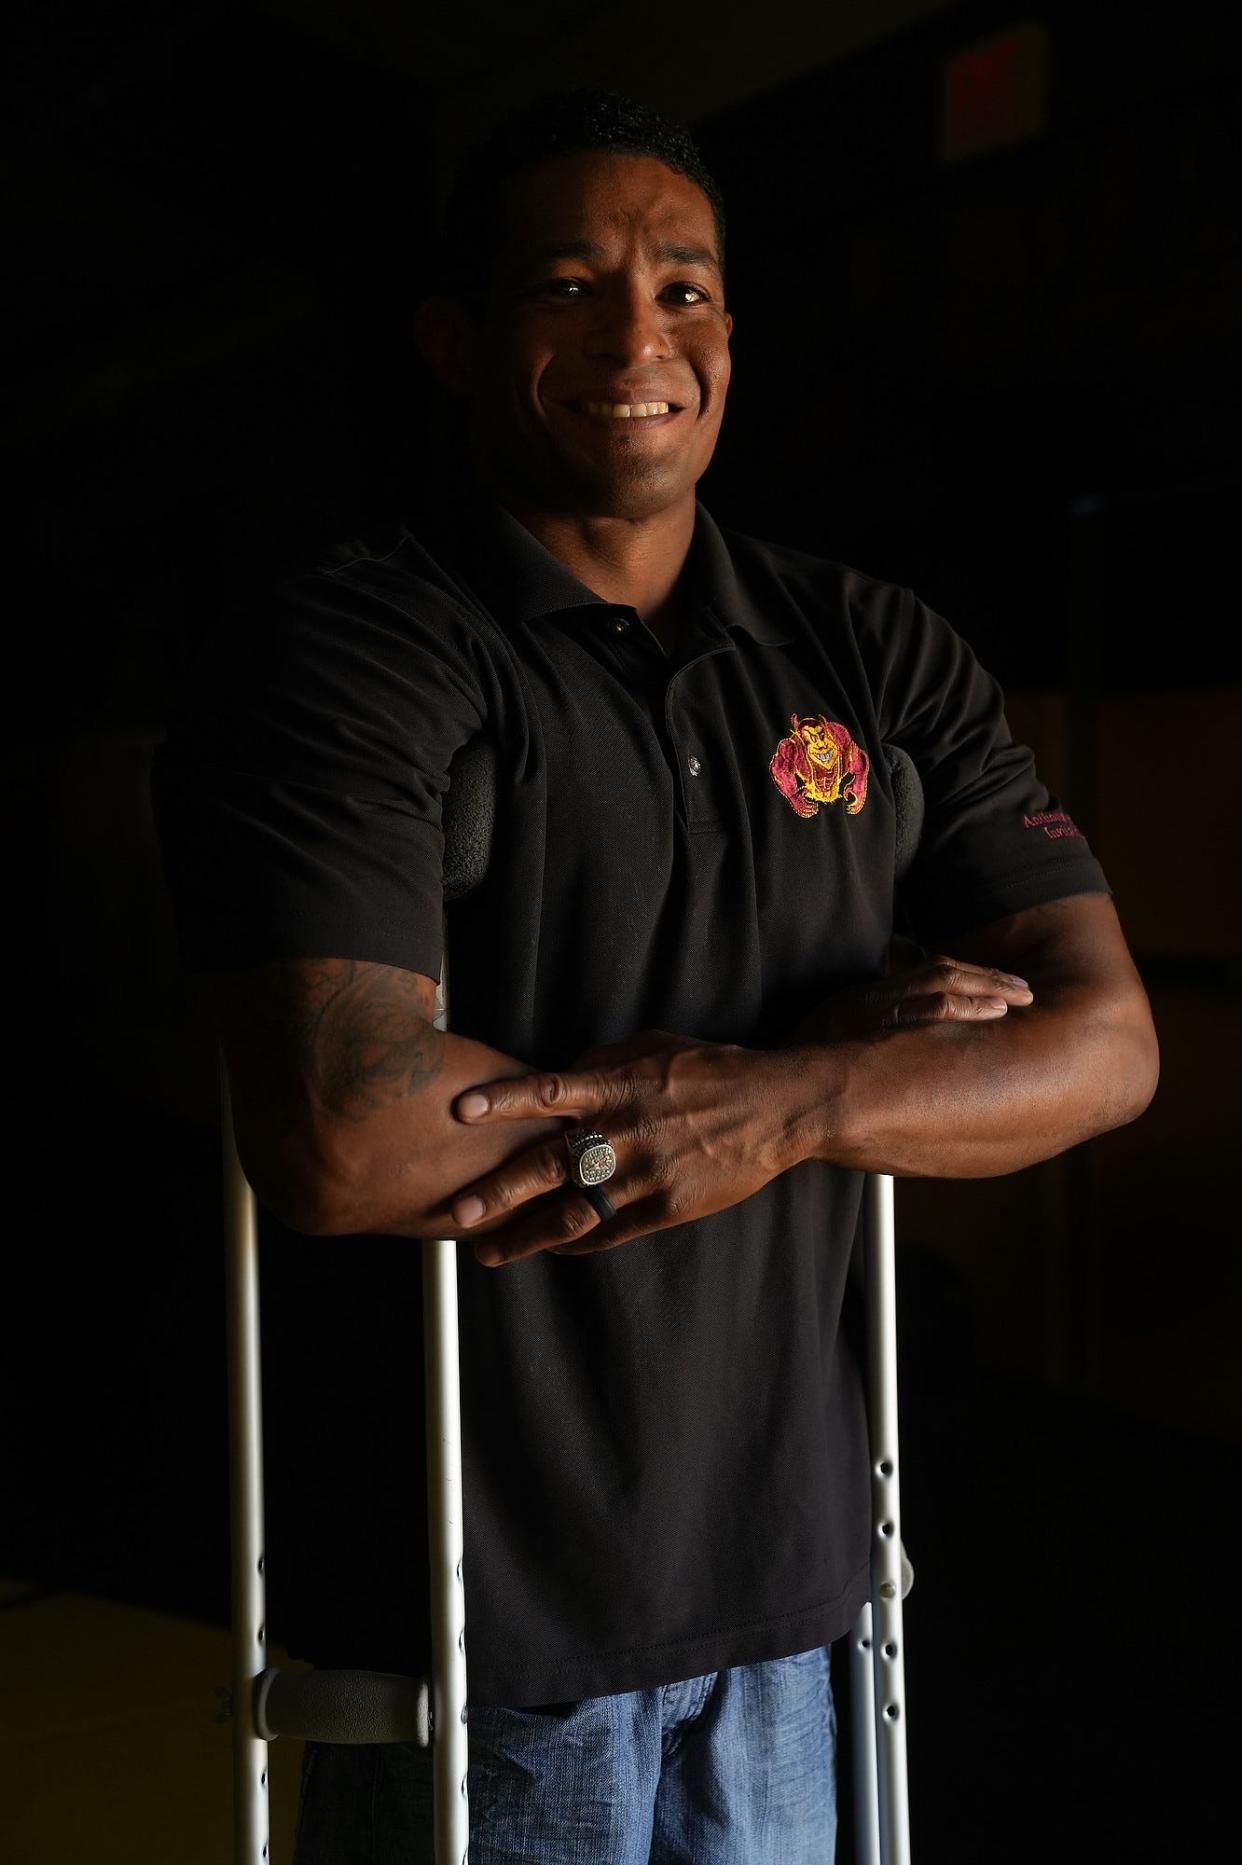 Anthony Robles, former ASU NCAA individual wrestling champion, poses for a portrait at the Riches Wrestling Complex on Thursday, Oct. 6, 2022, in Tempe. Robles will be inducted into the ASU Sports Hall of Fame.